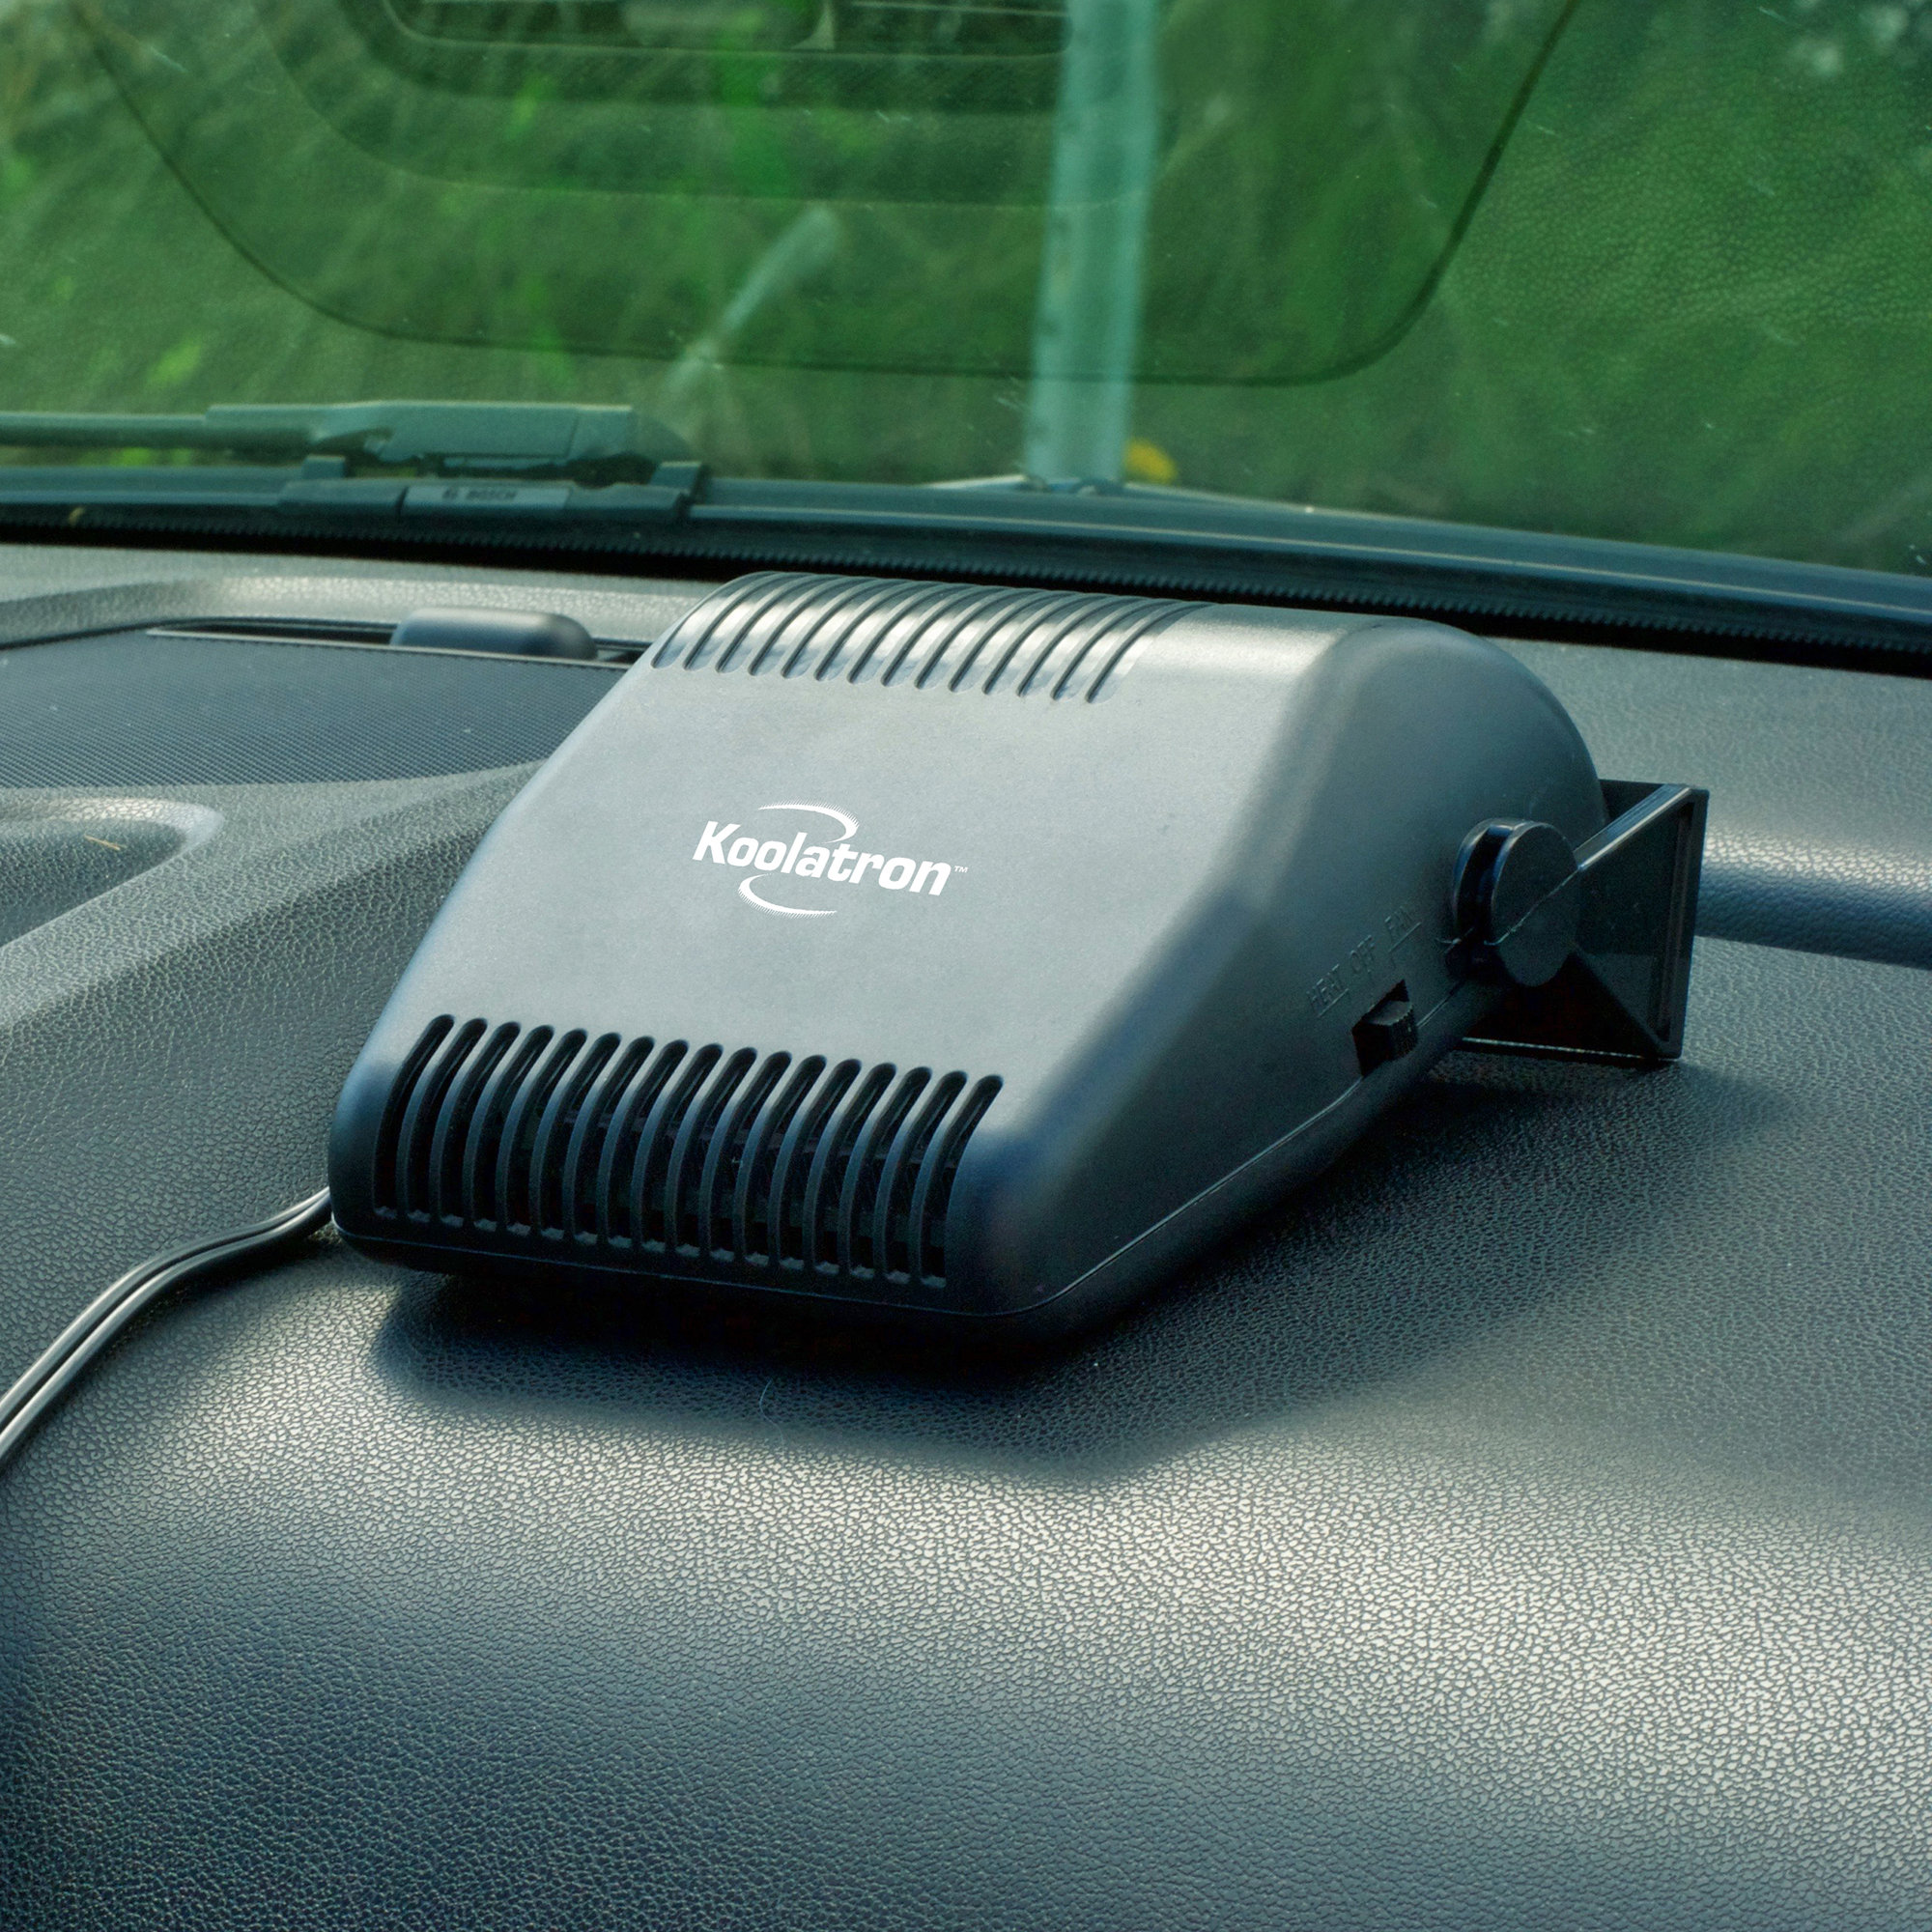 How Does A Car Defroster Work?